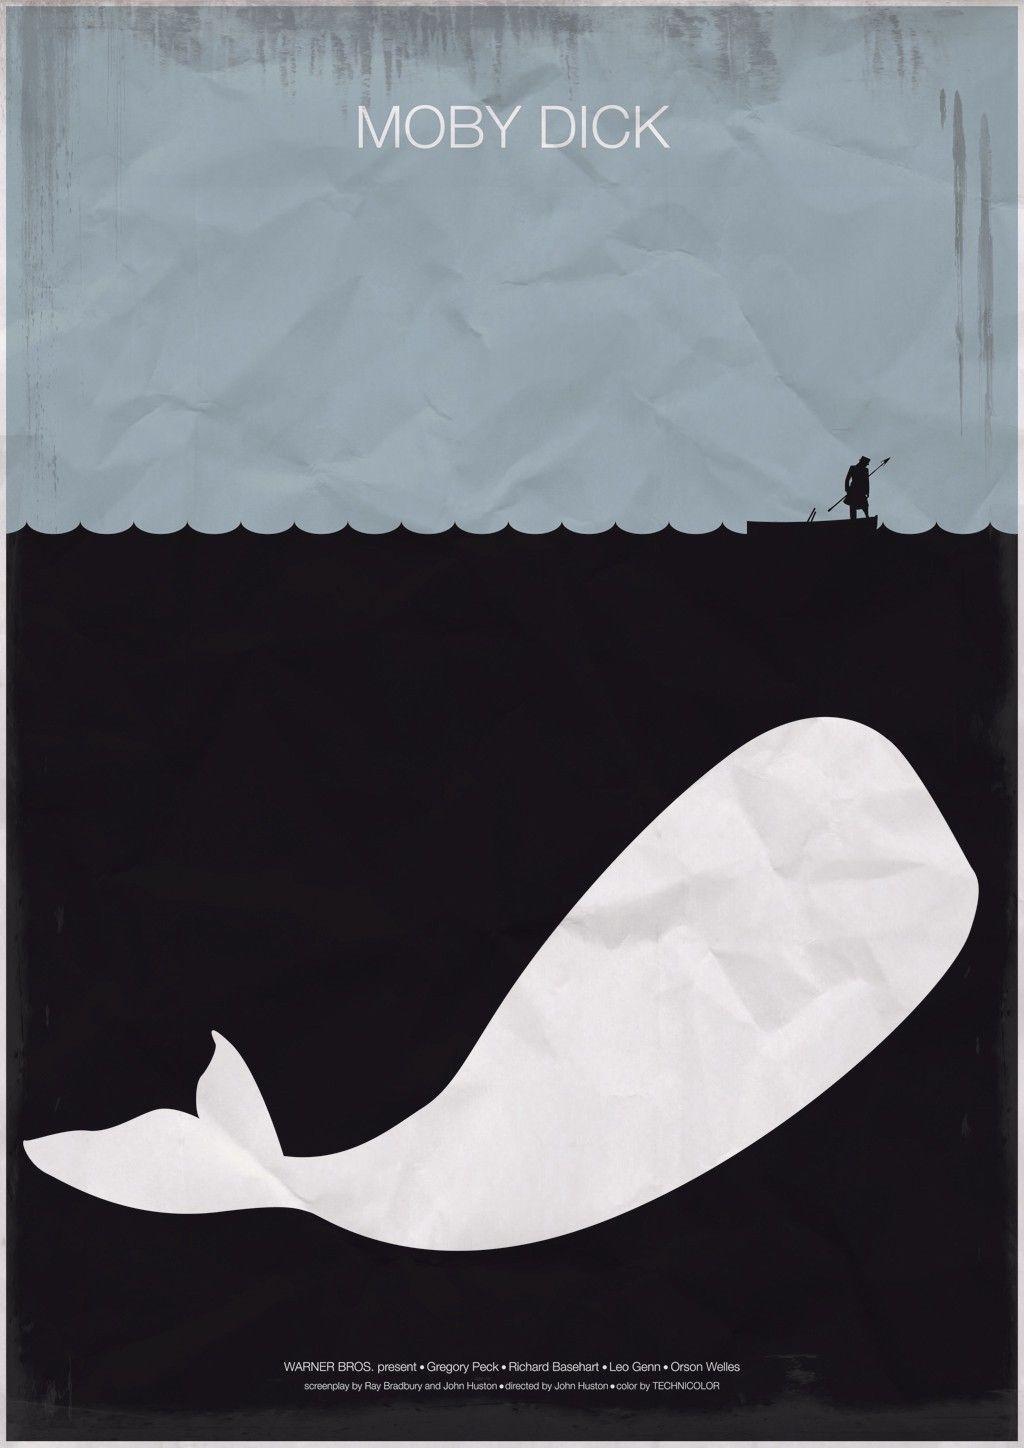 Moby dick critisism